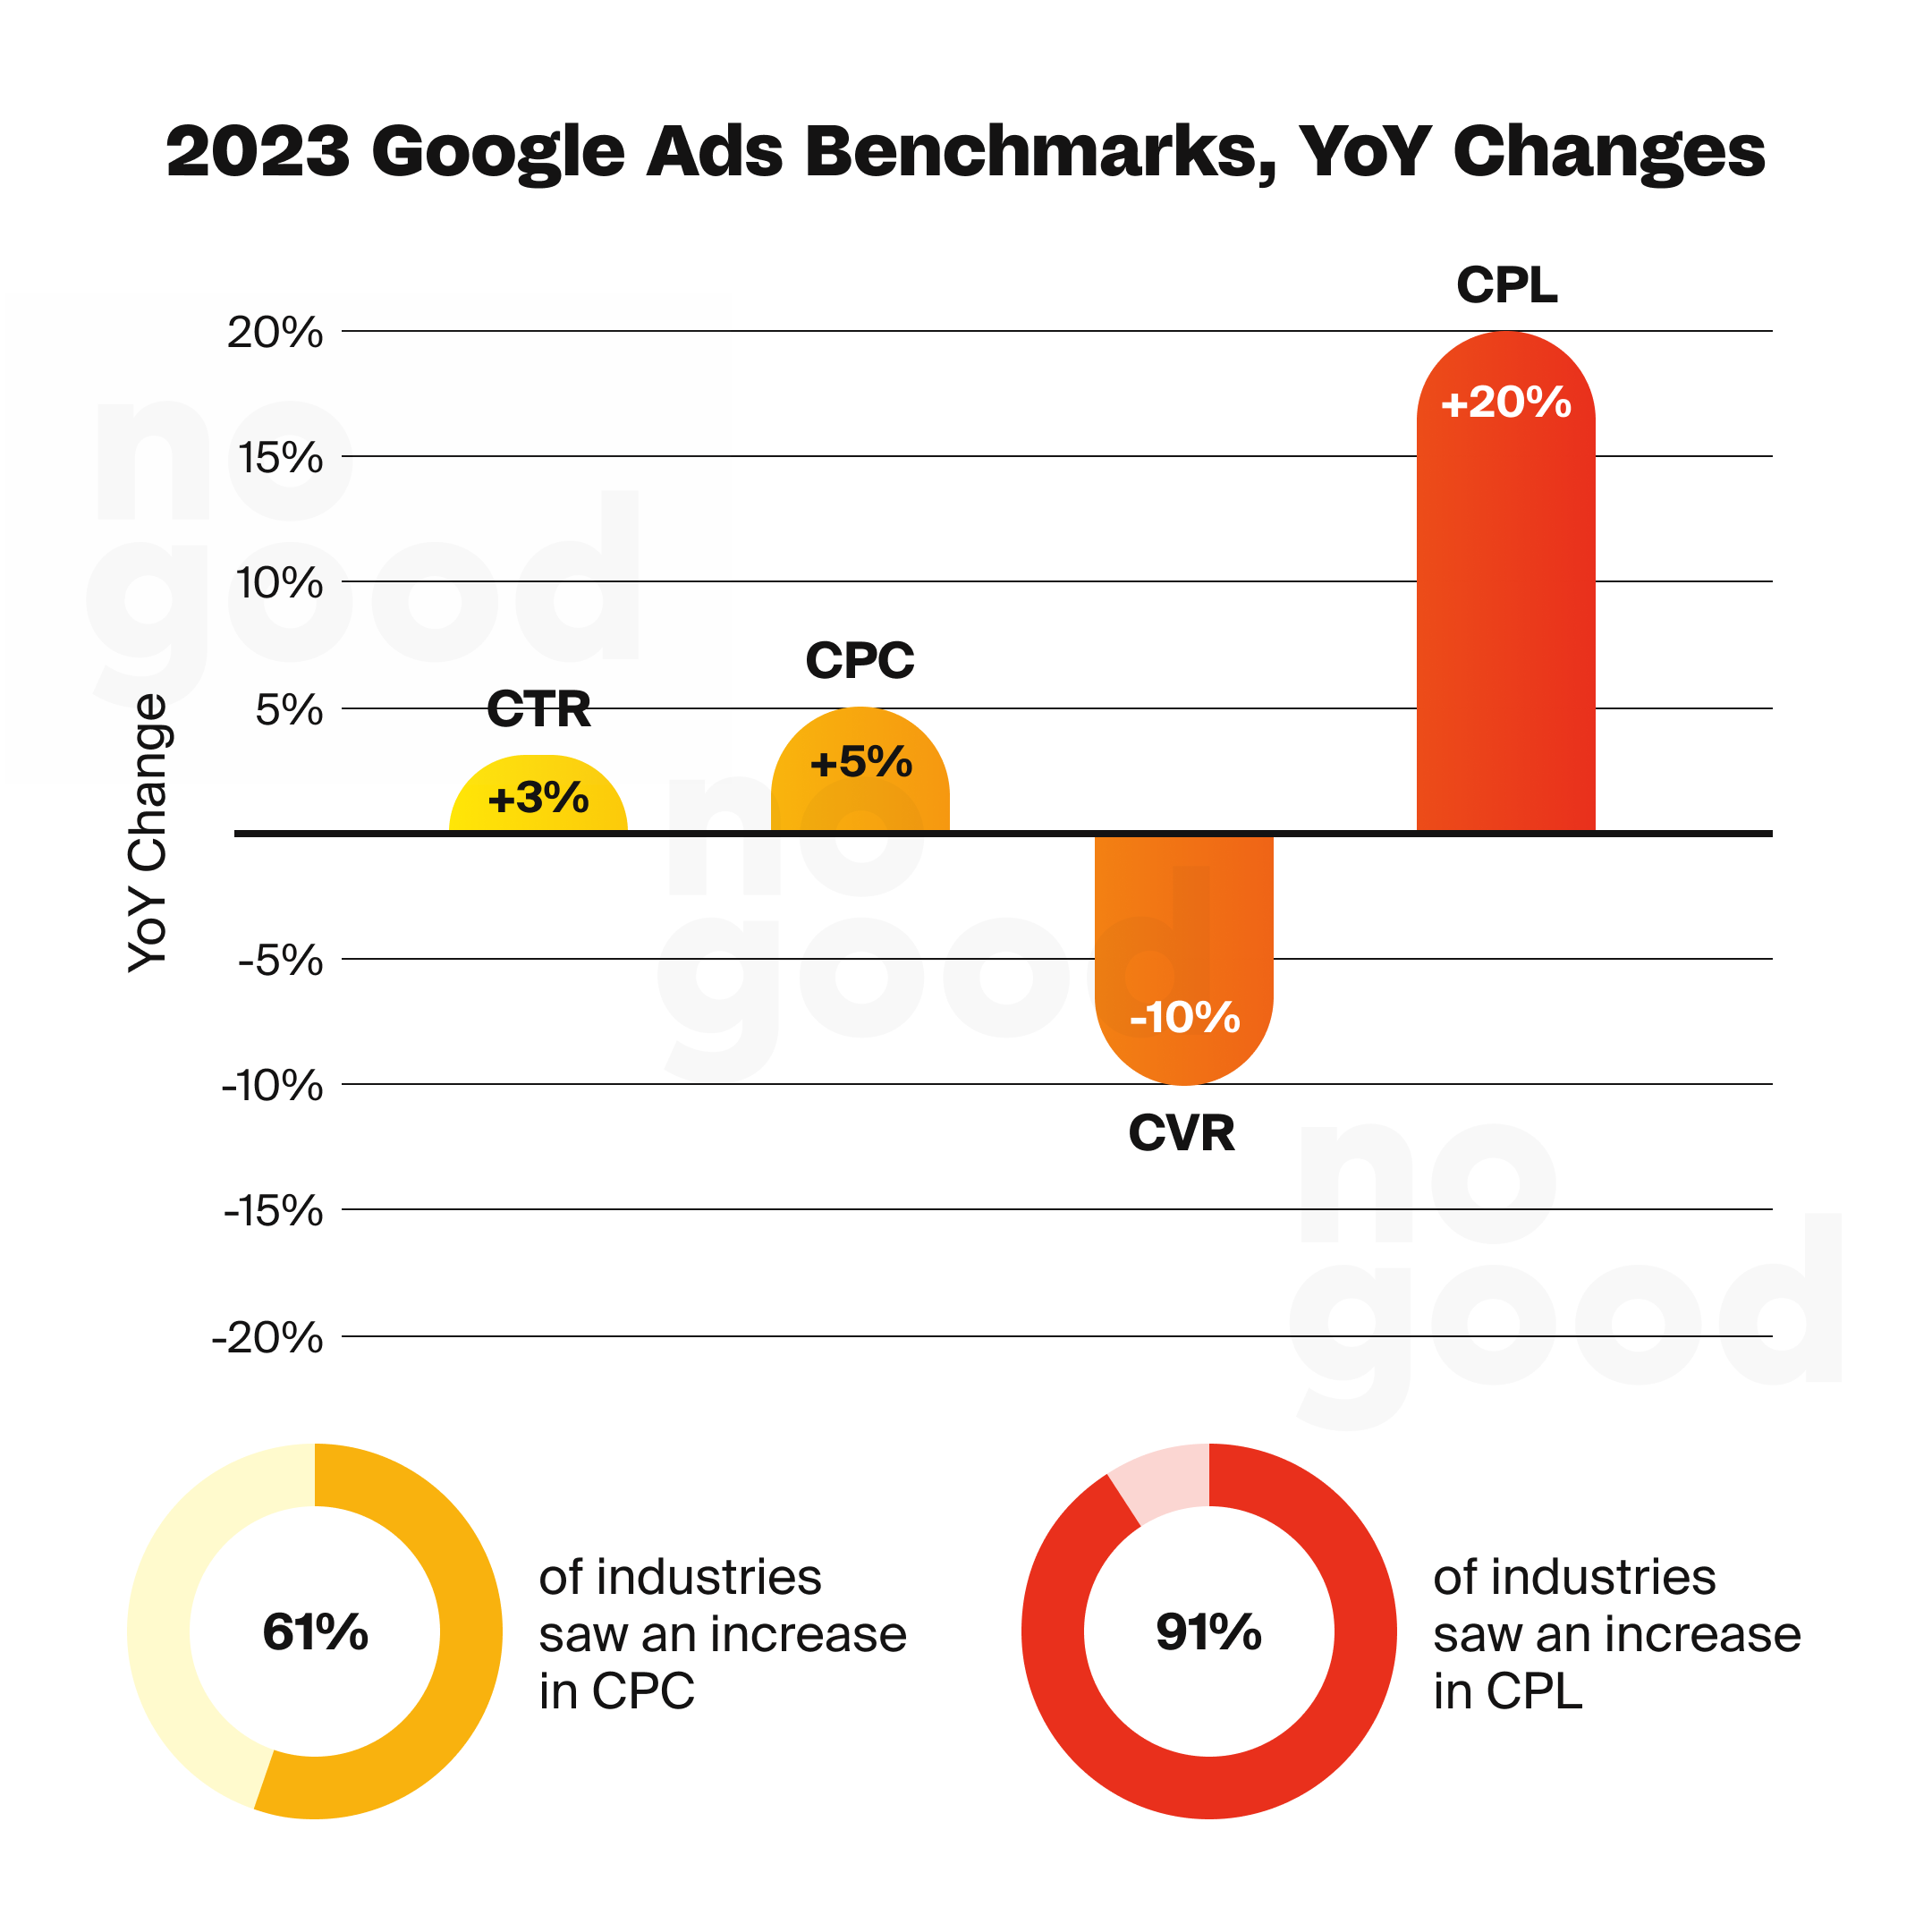 Google ads benchmarks - YoY changes